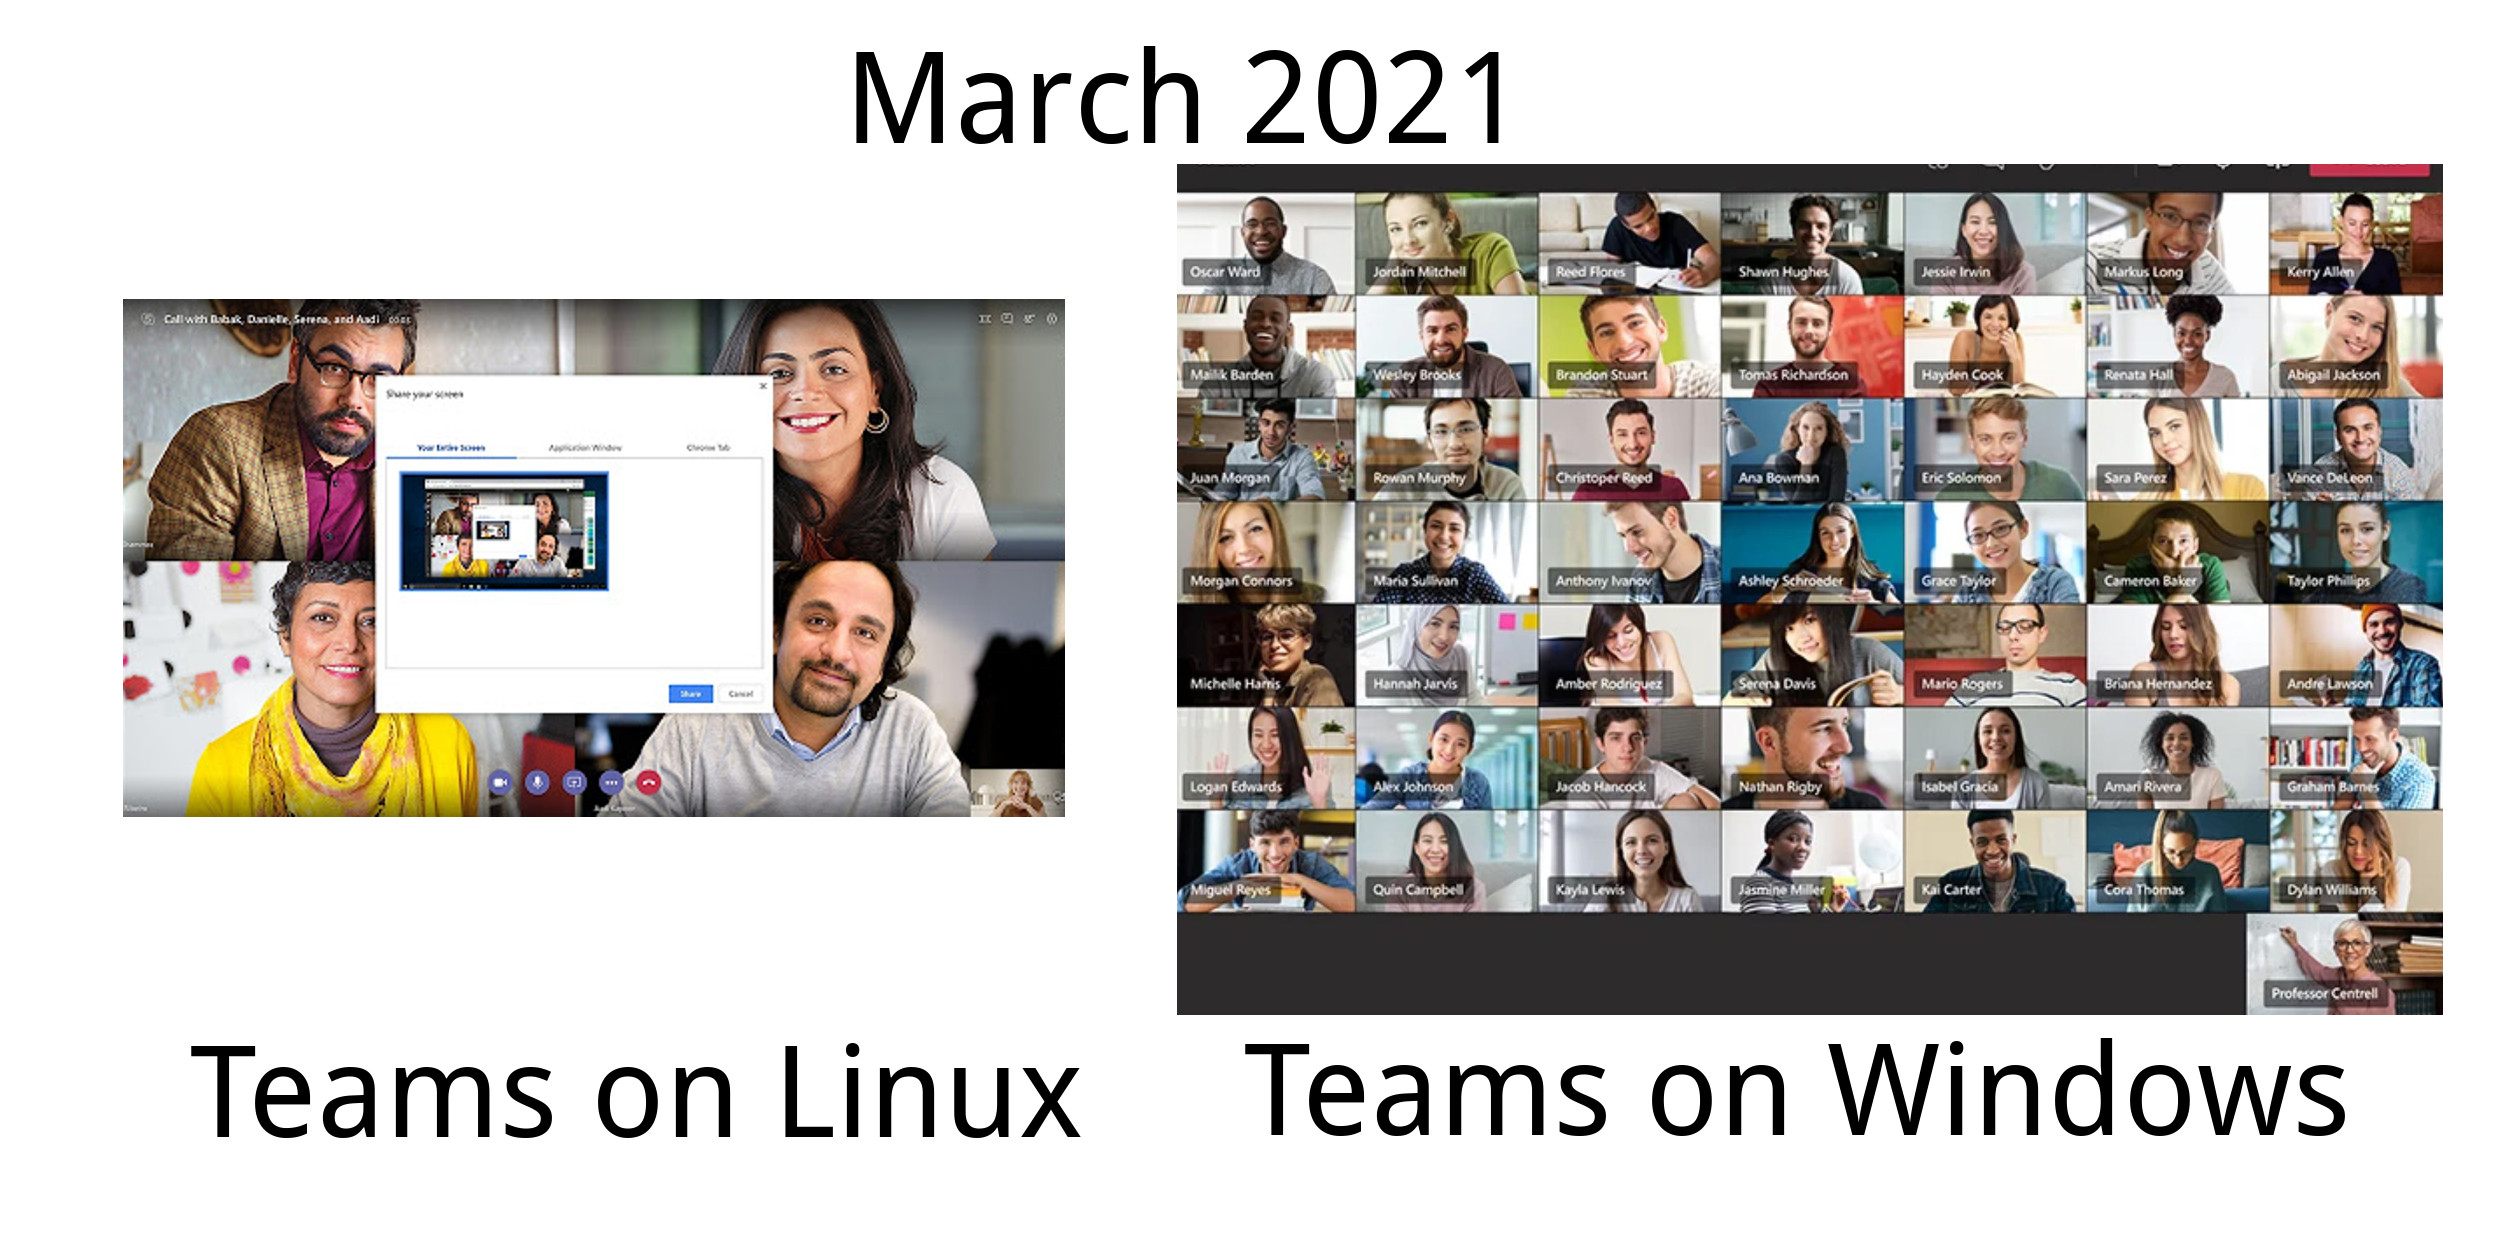 Comparison of Teams for Linux and Windows in March 2021: Linux only allowing a 4 person view while Windows allows up to 49 participants to be viewed.